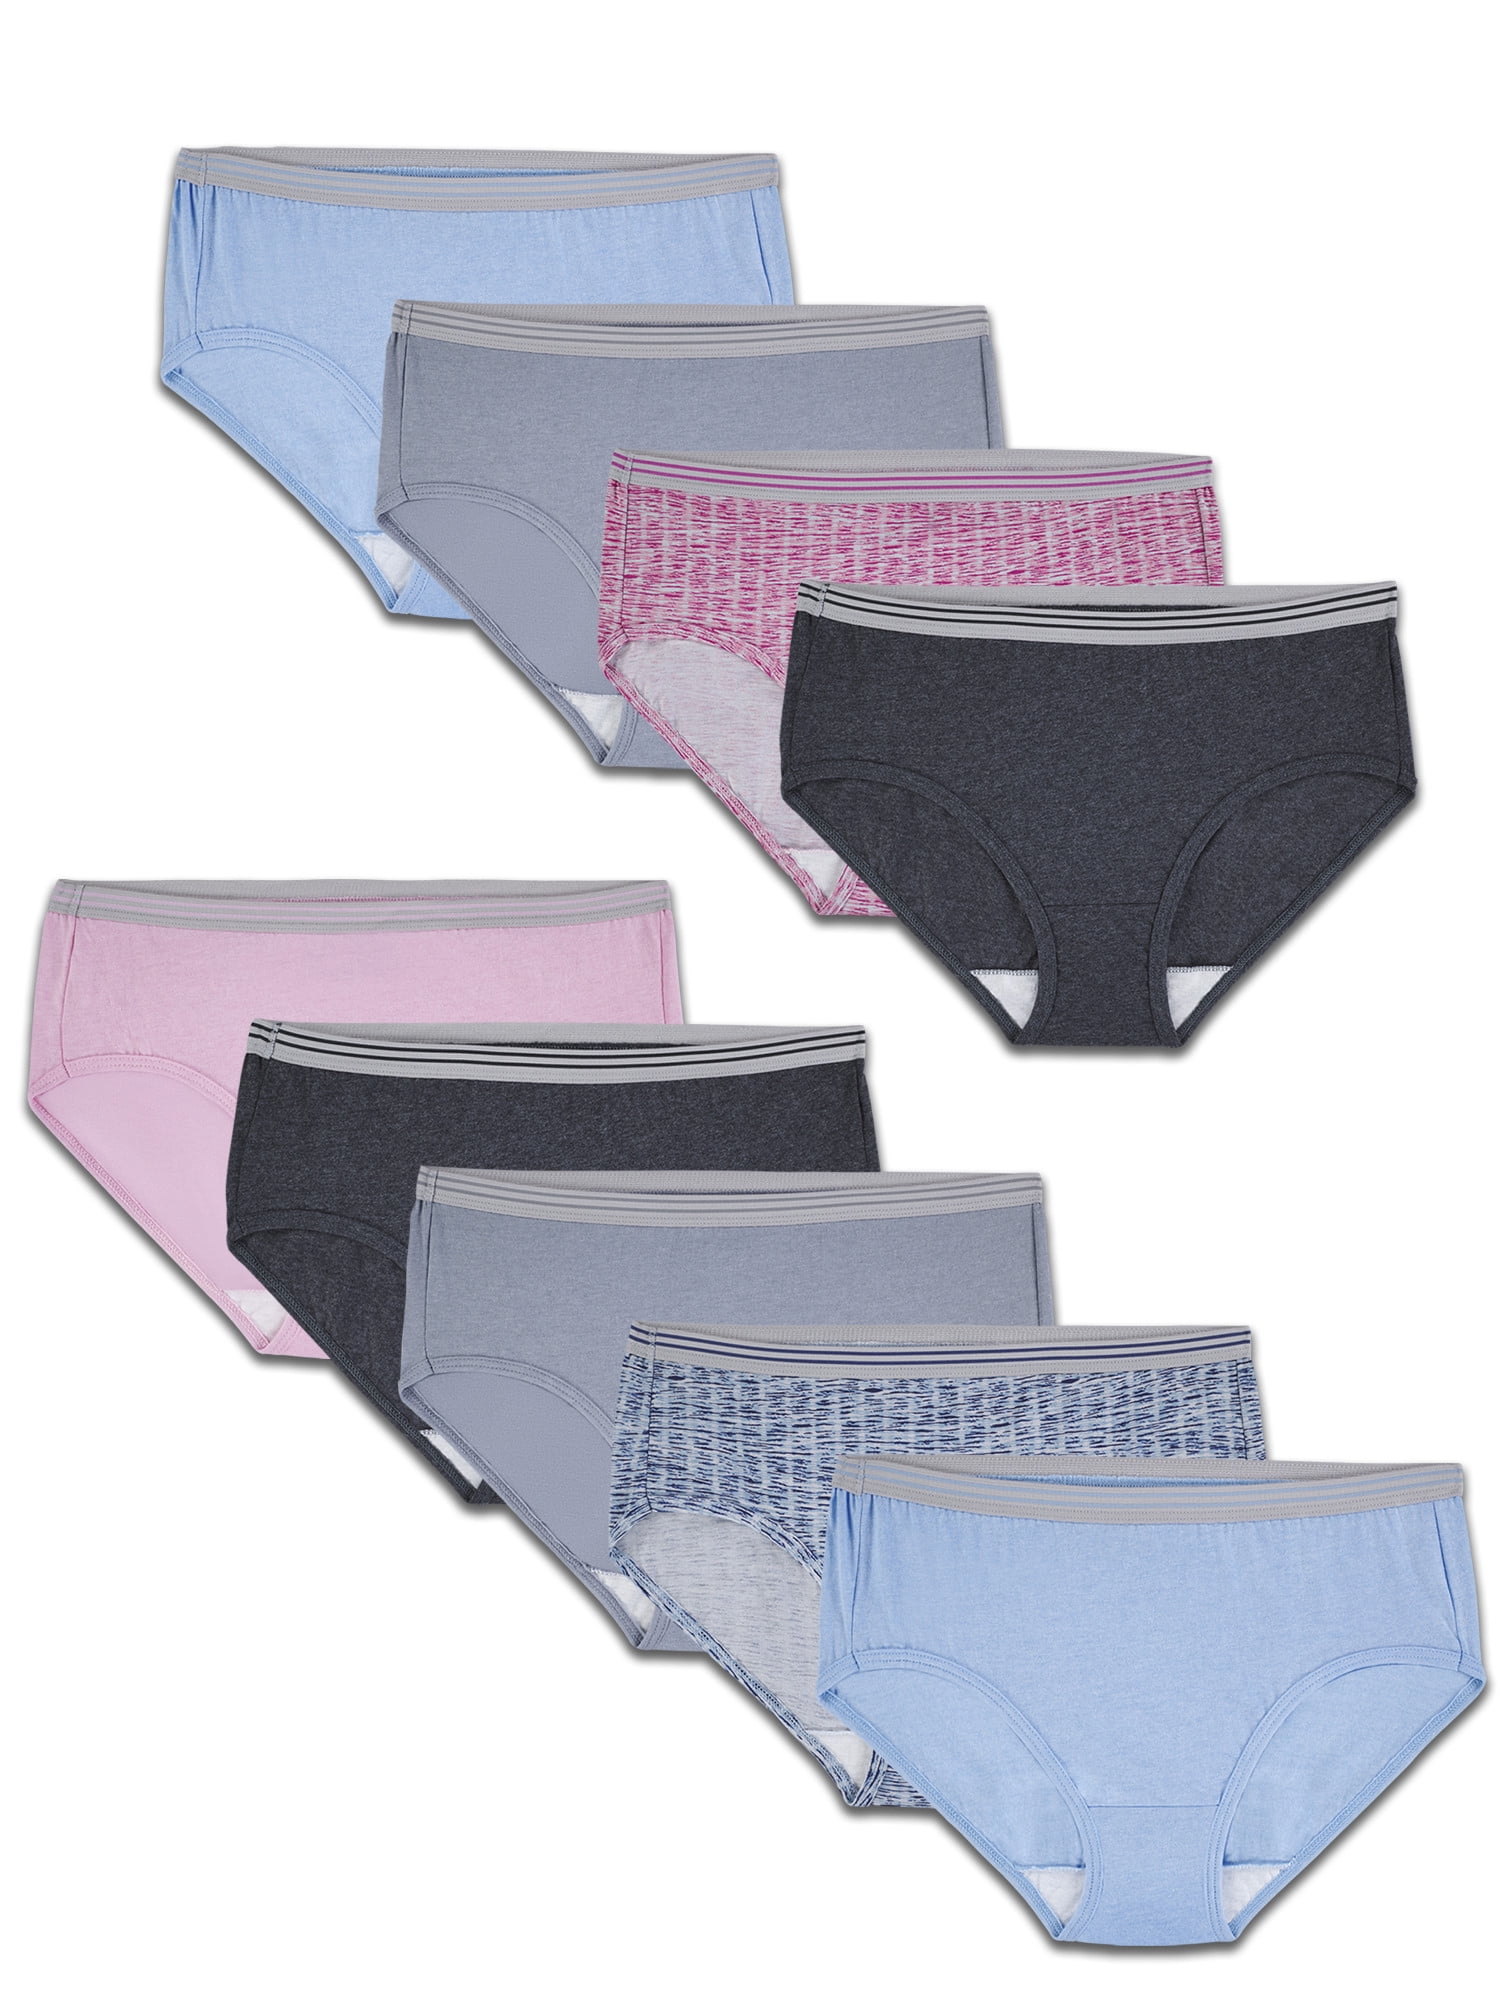 Fruit of the Loom Women's Heather Low Rise Briefs Tag Free, 9 Pack, Size S  (5)